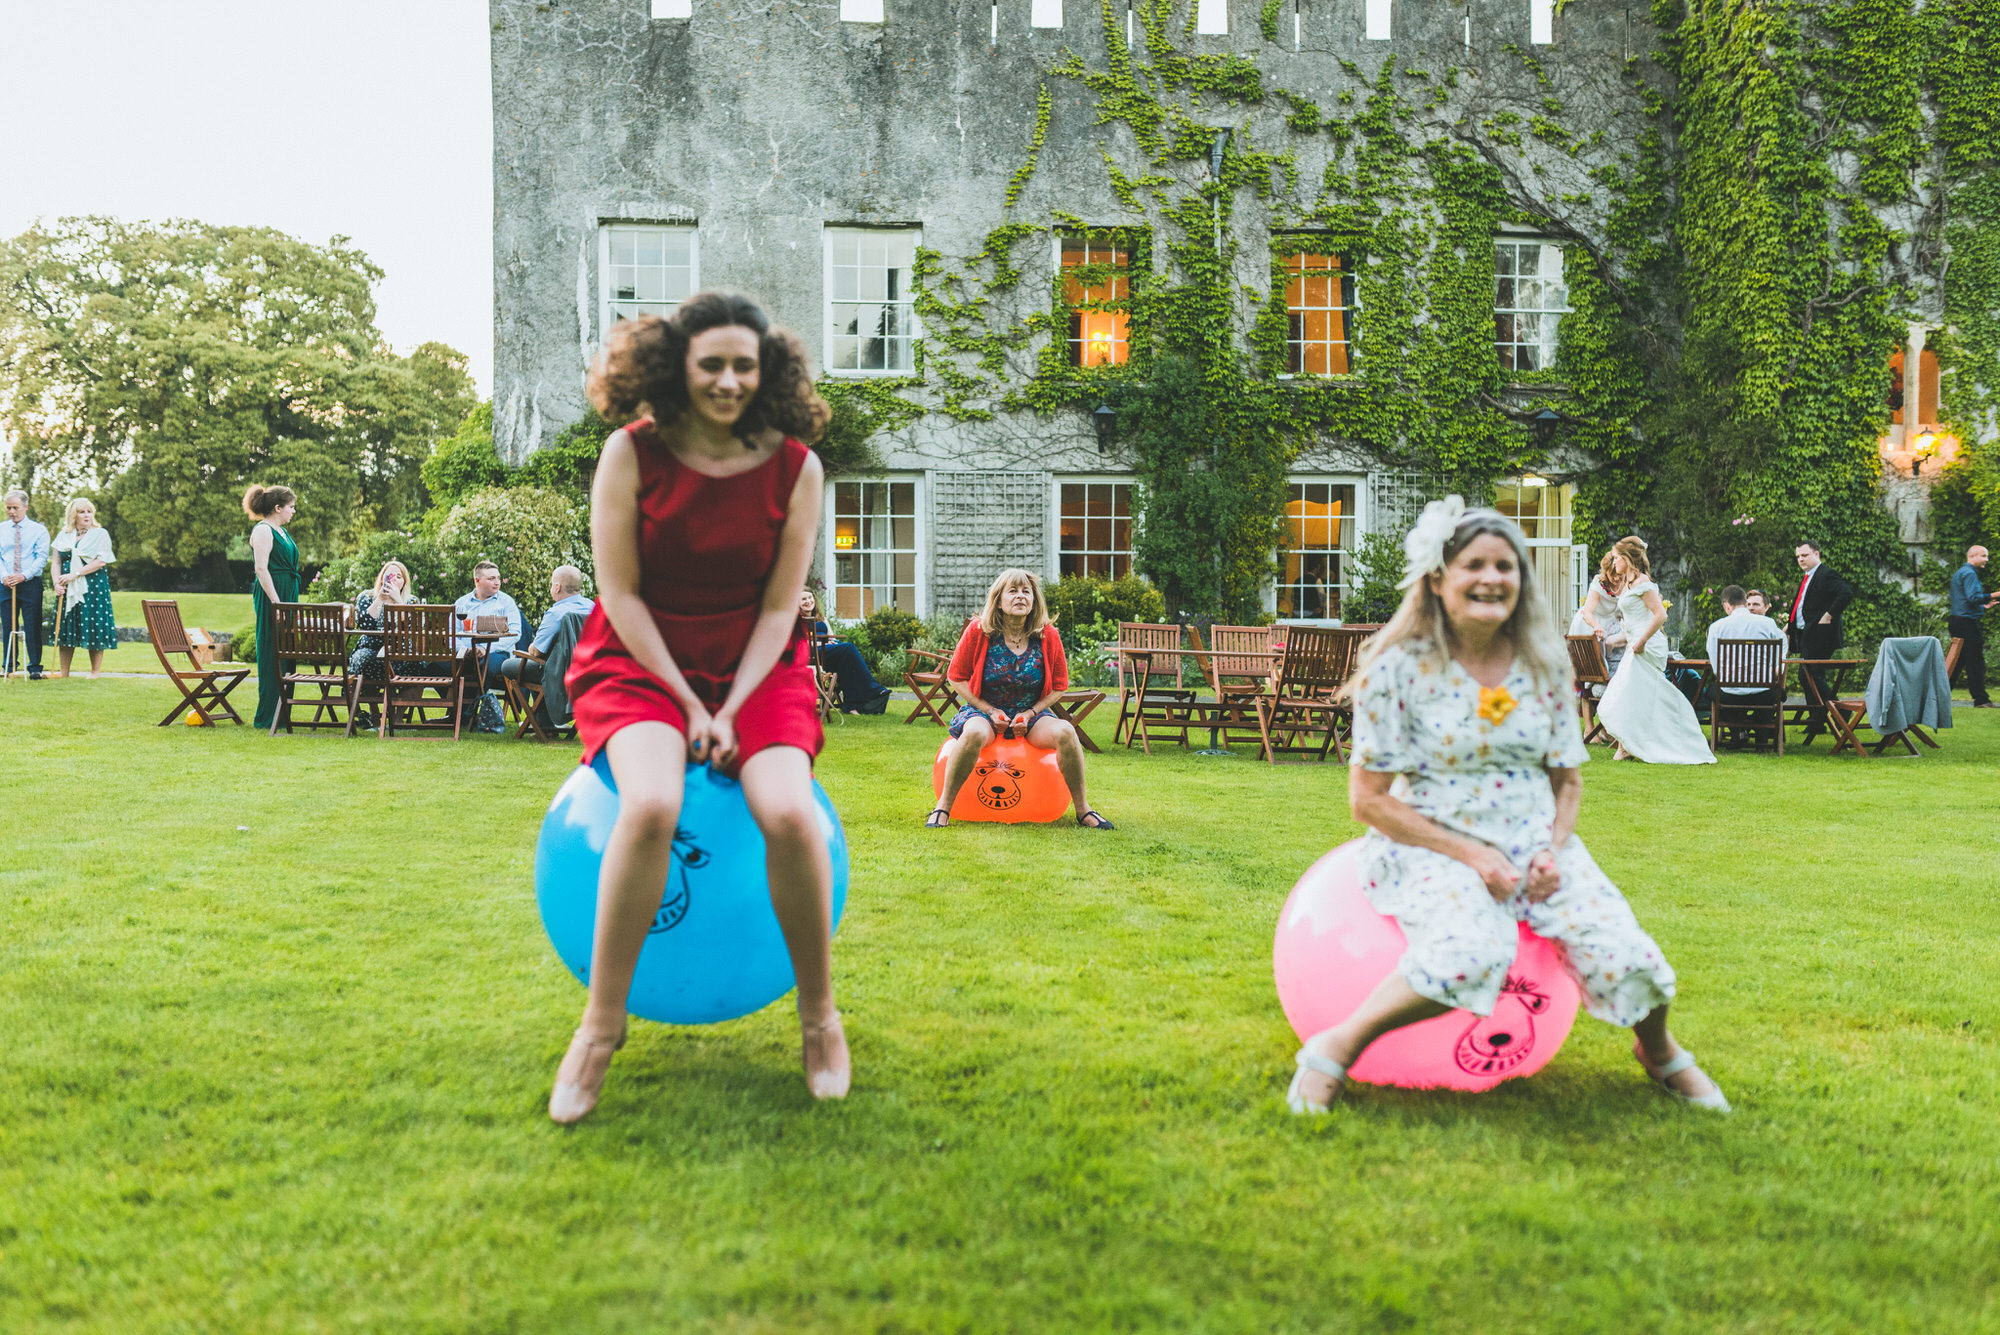 Wedding guests bouncing on Space Hoppers